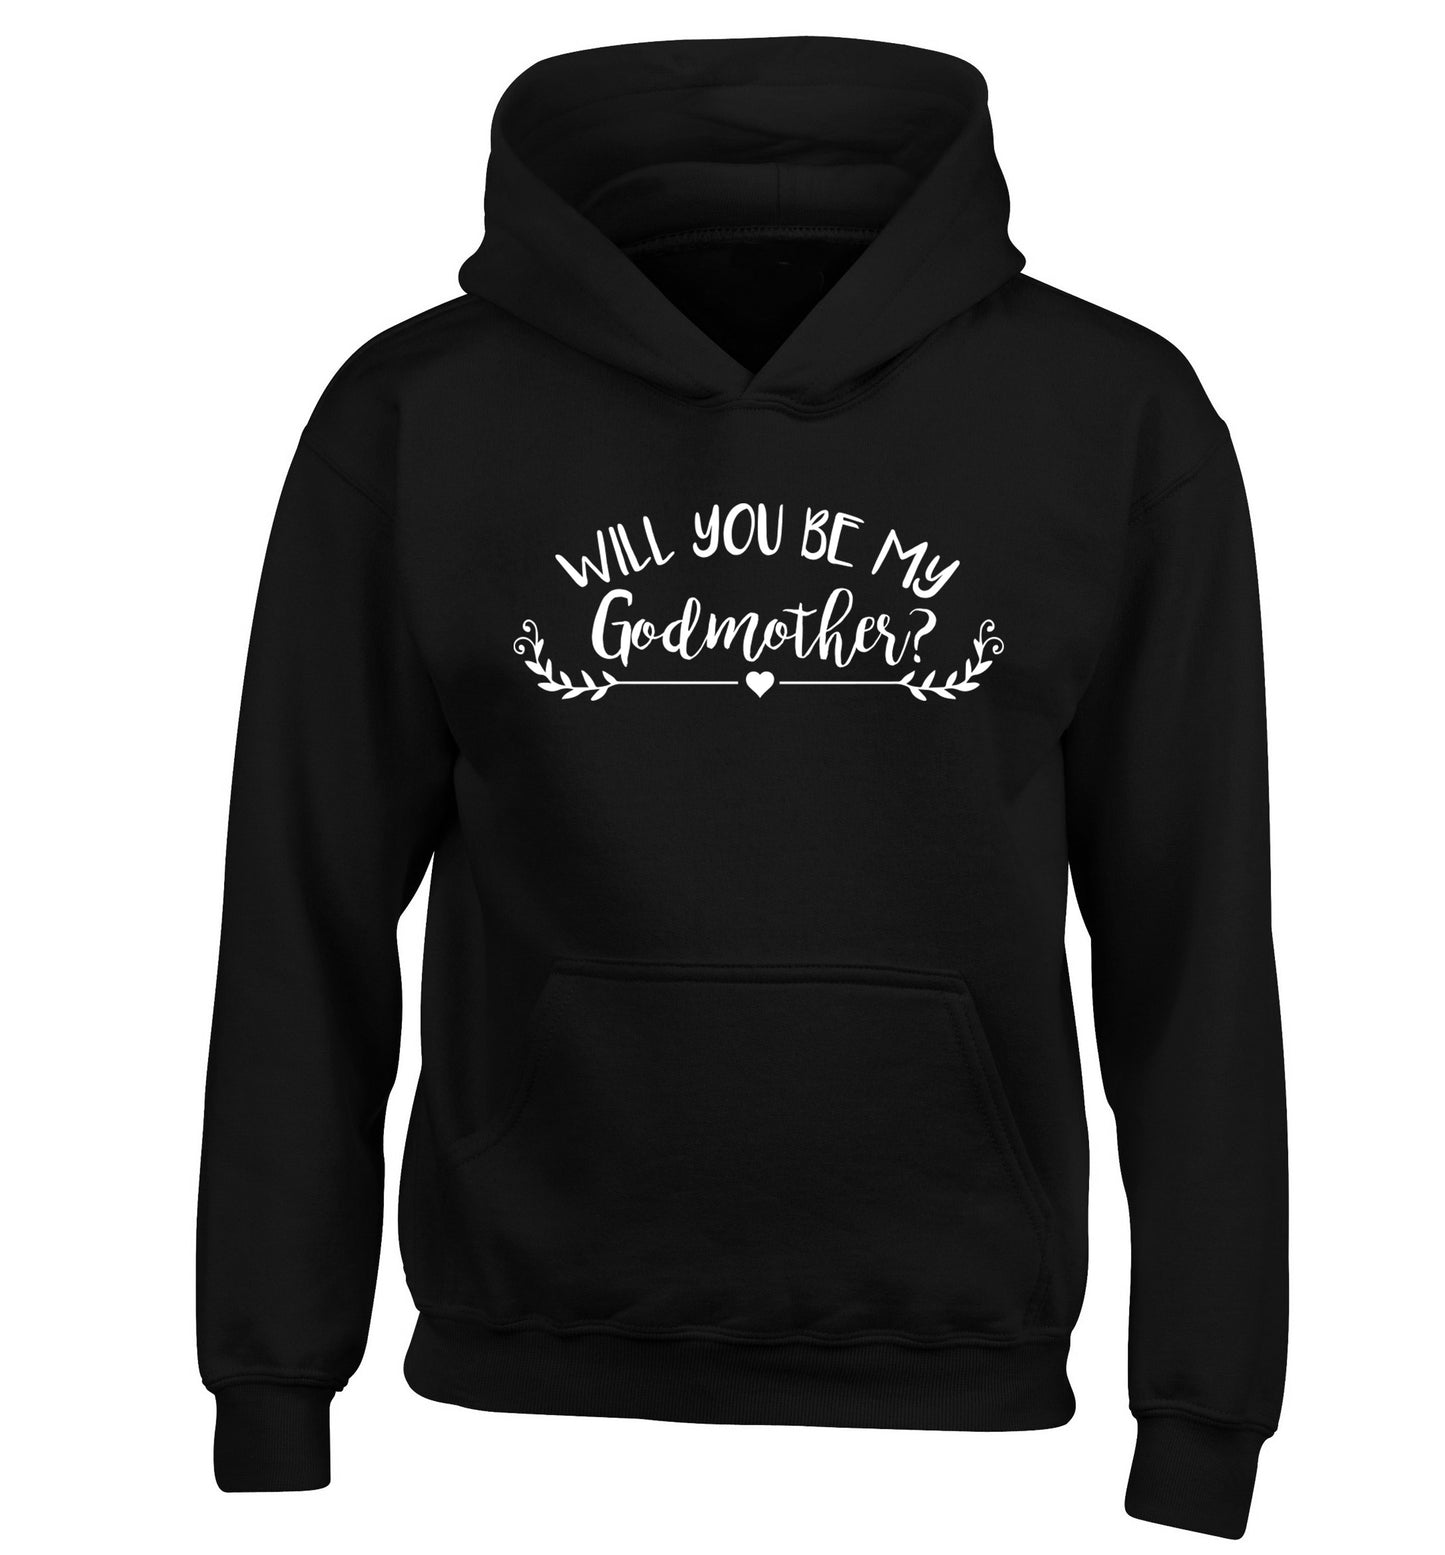 Will you be my godmother? children's black hoodie 12-14 Years